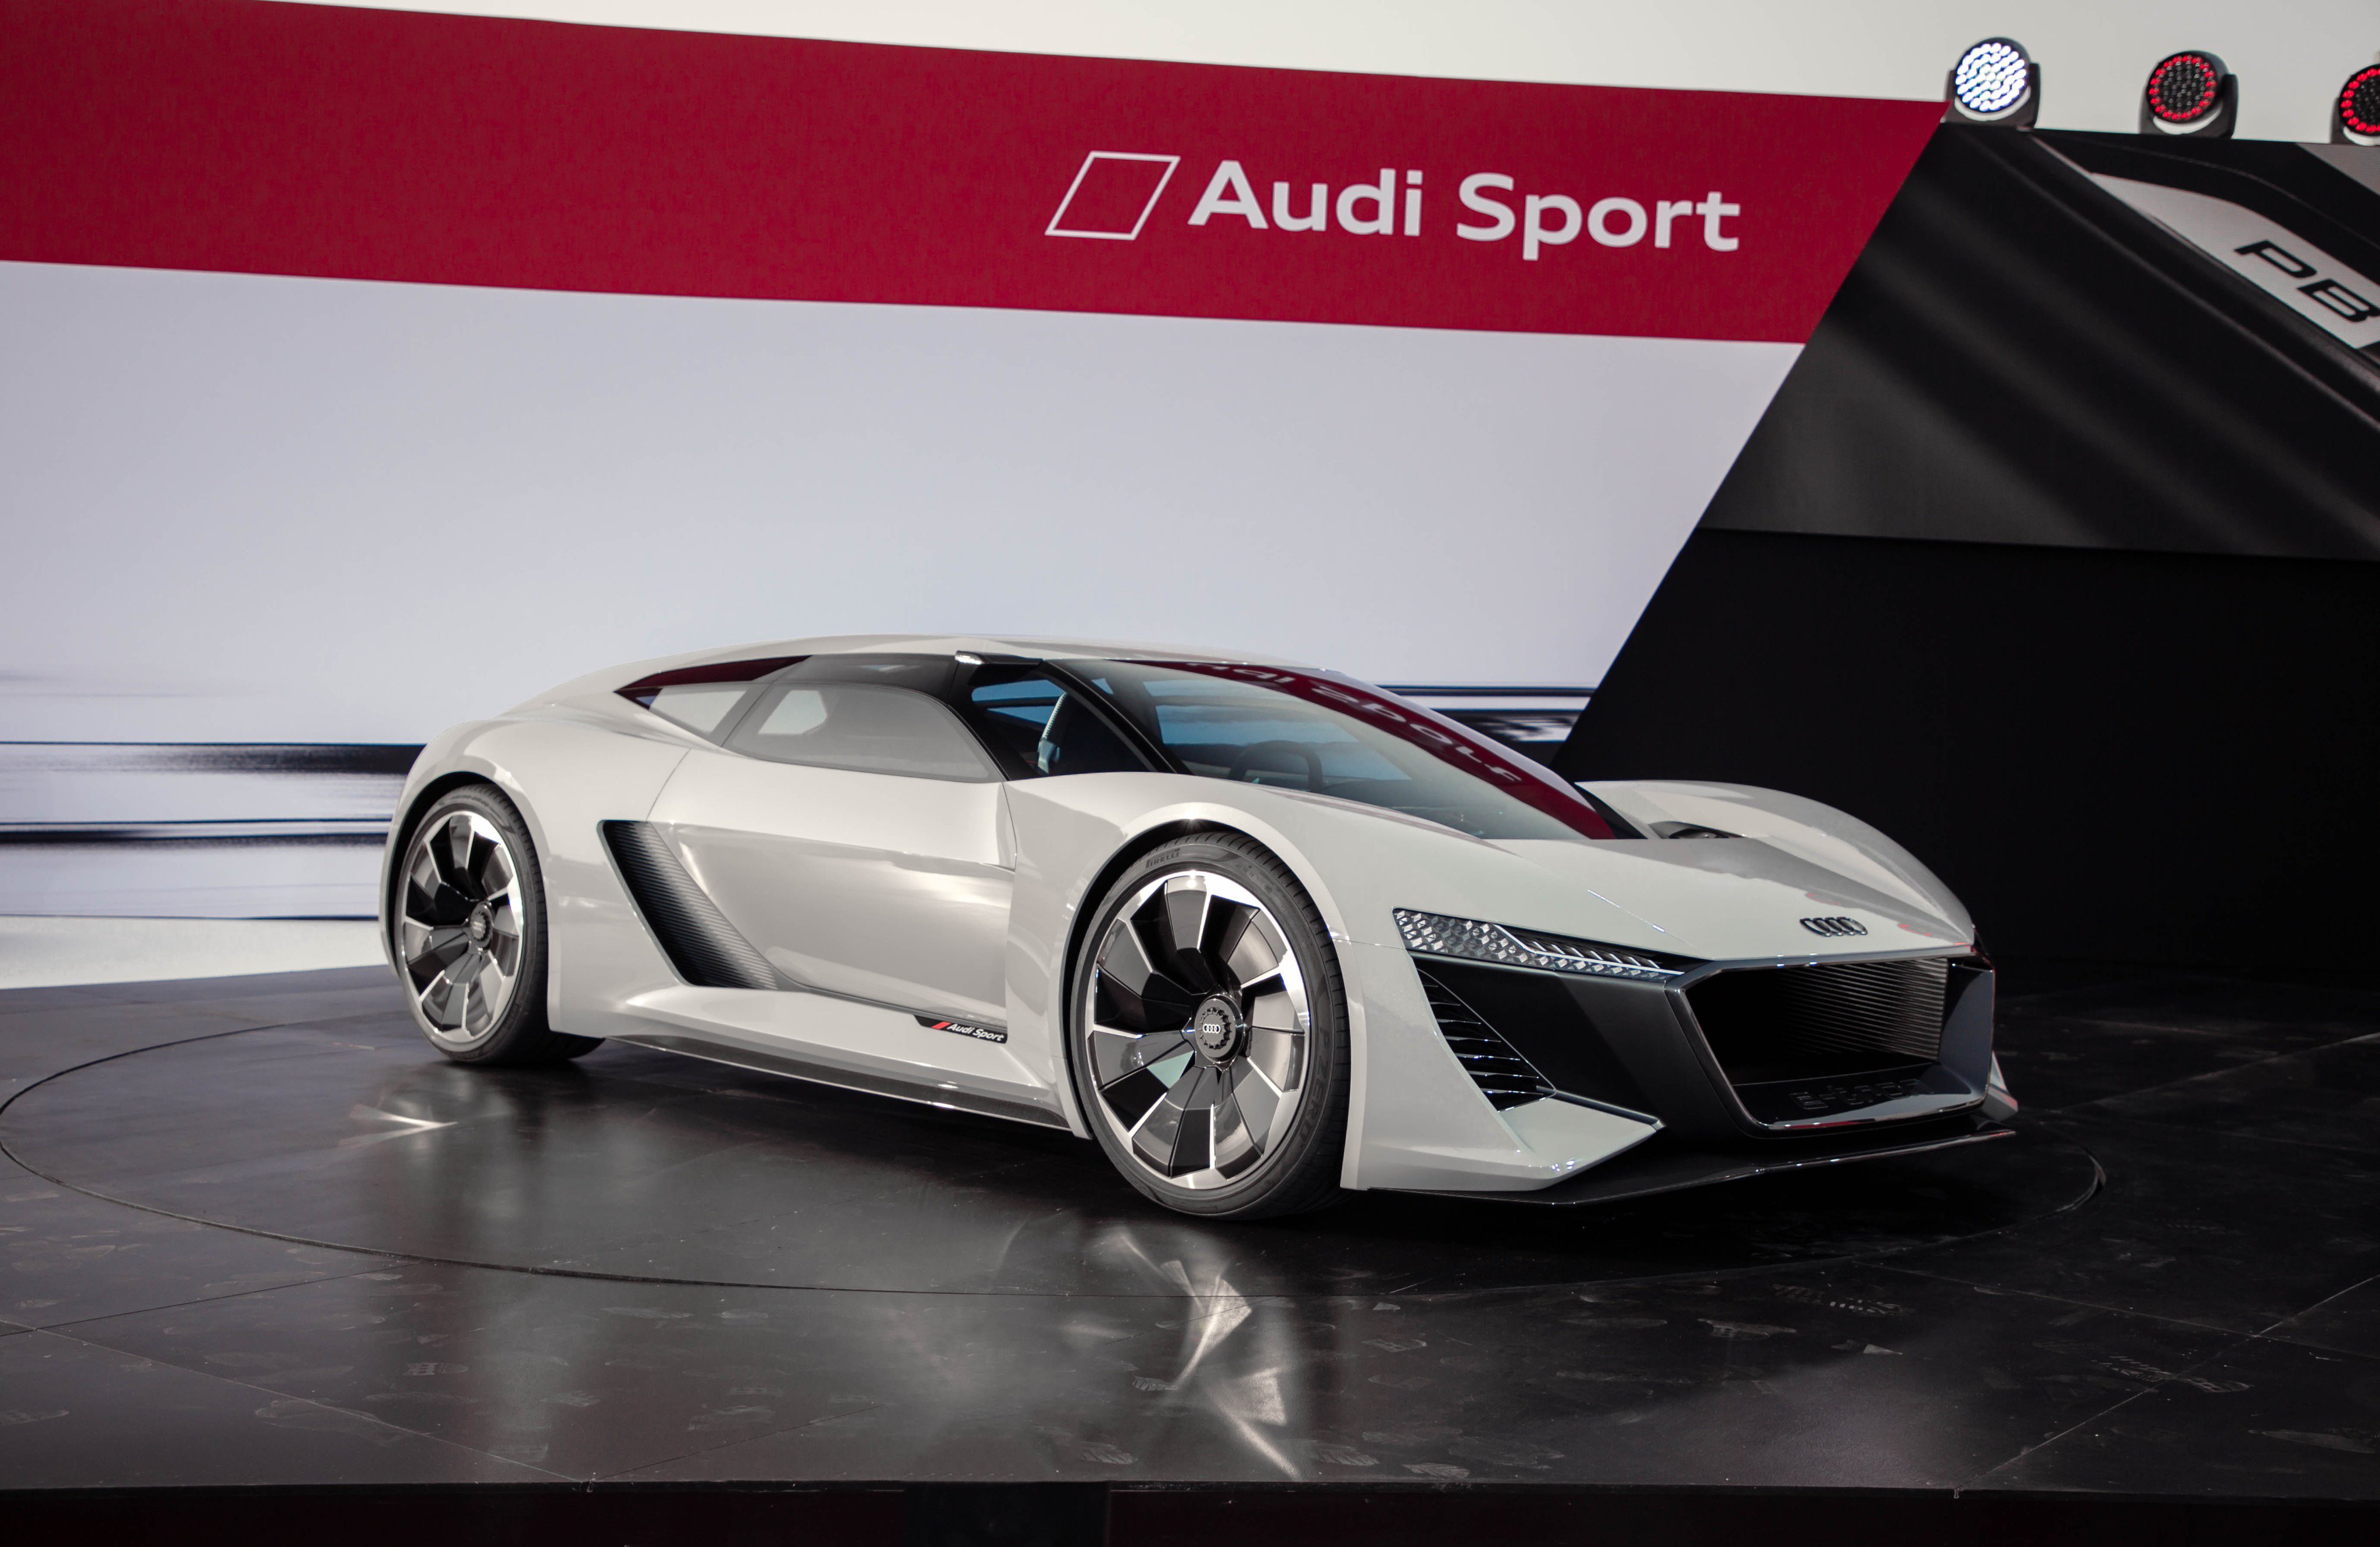 bao john wick surprised everyone by being the first owner of the audi r super sports car the world s fastest future supercar 6548cadcda914 John Wick Surprised Everyone By Being The First Owner Of The 2023 Audi R10 Super Sports Car, The World's Fastest Future Supercar